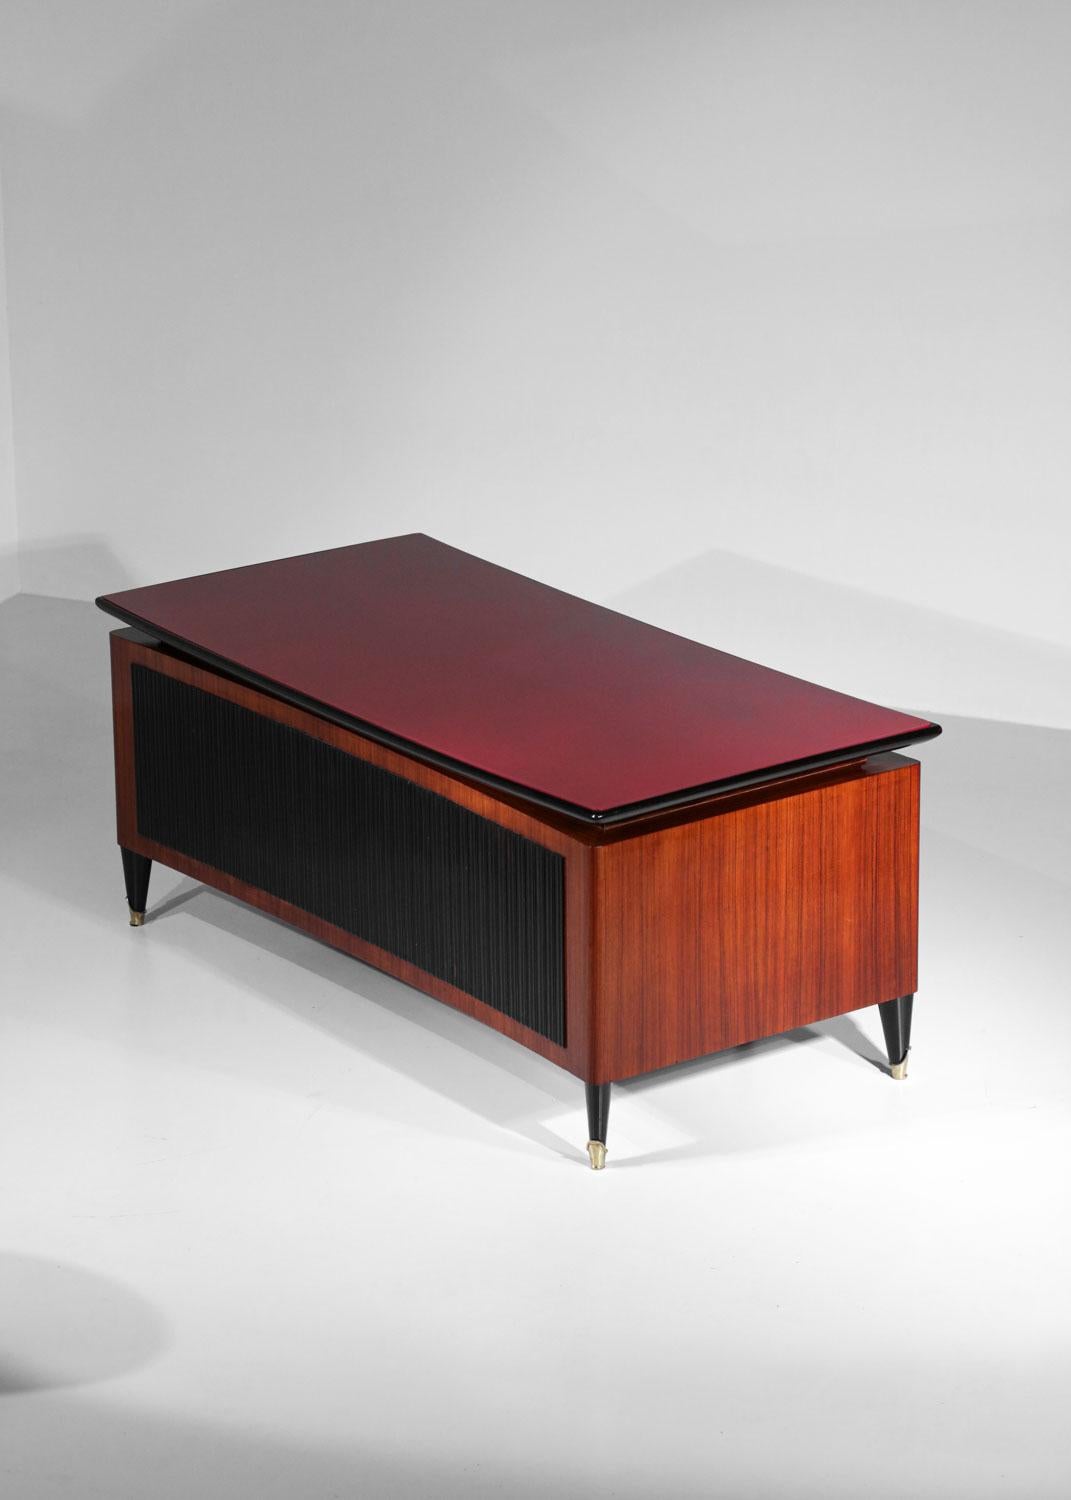 Italian large Desk by Vittorio Dassi solid wood and glass 60s - G725 For Sale 6